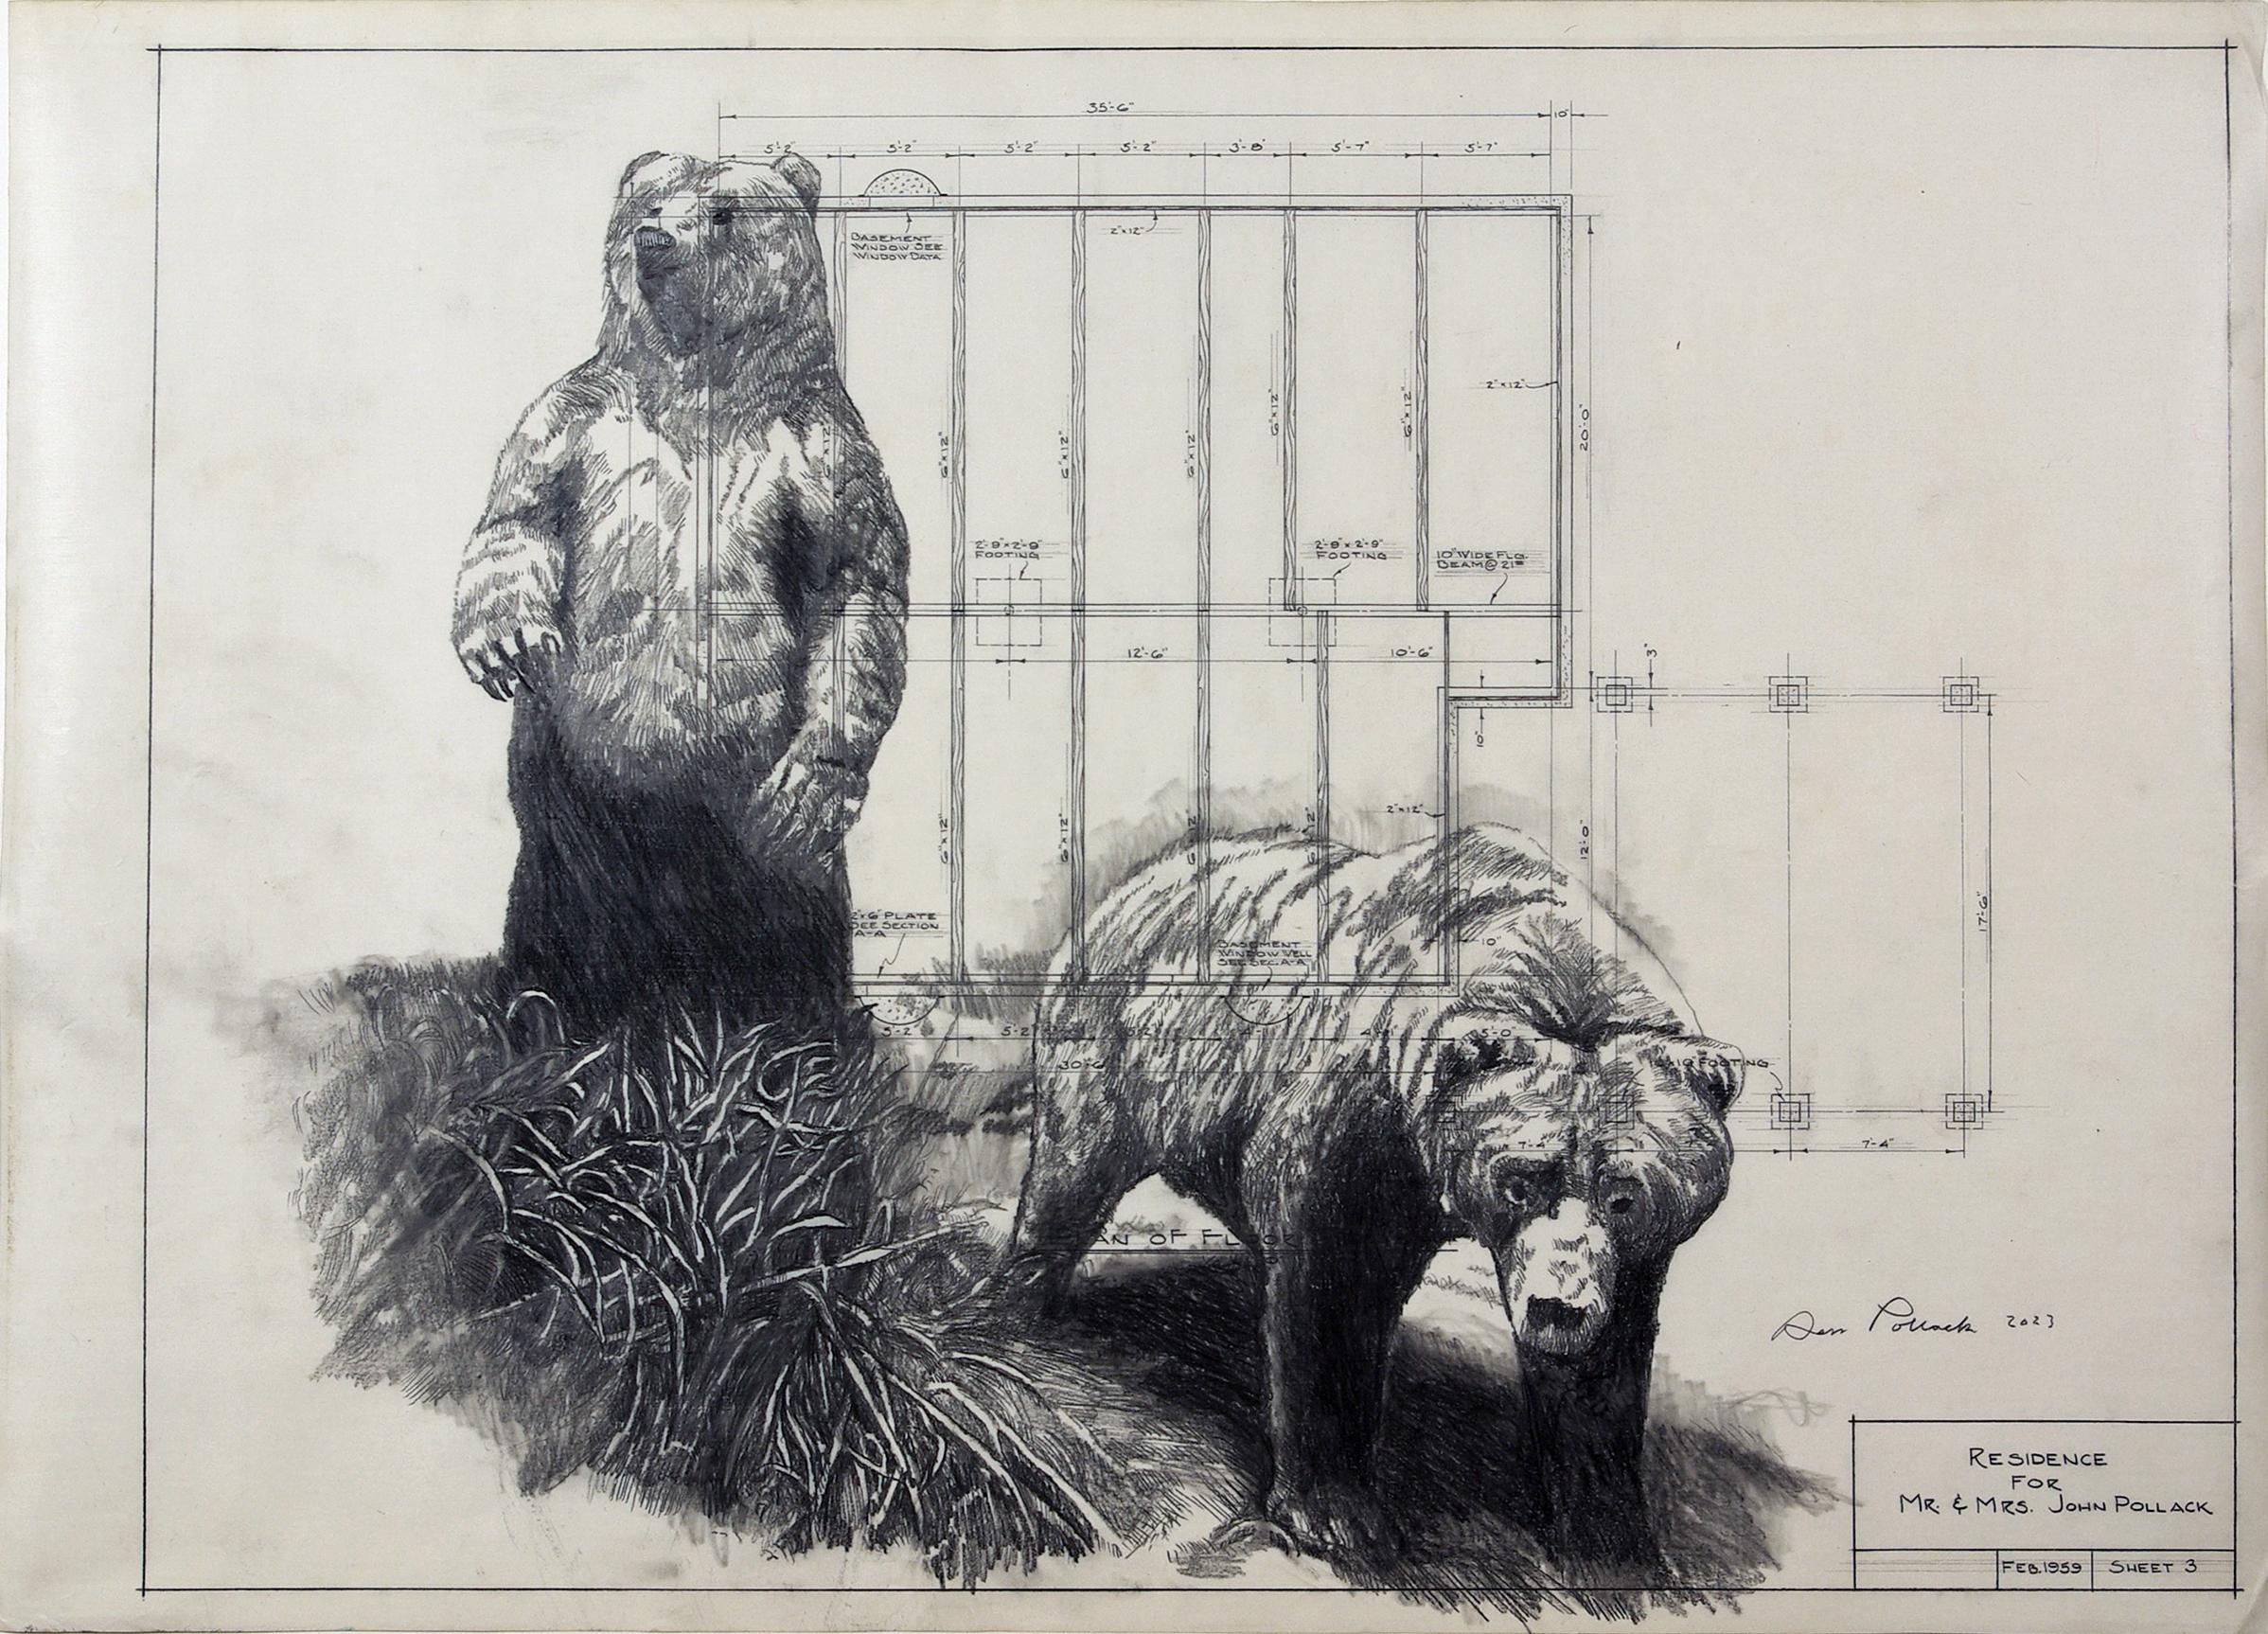 Solid Footings - Graphite Drawing on Antique Architectural Drawings of Bears